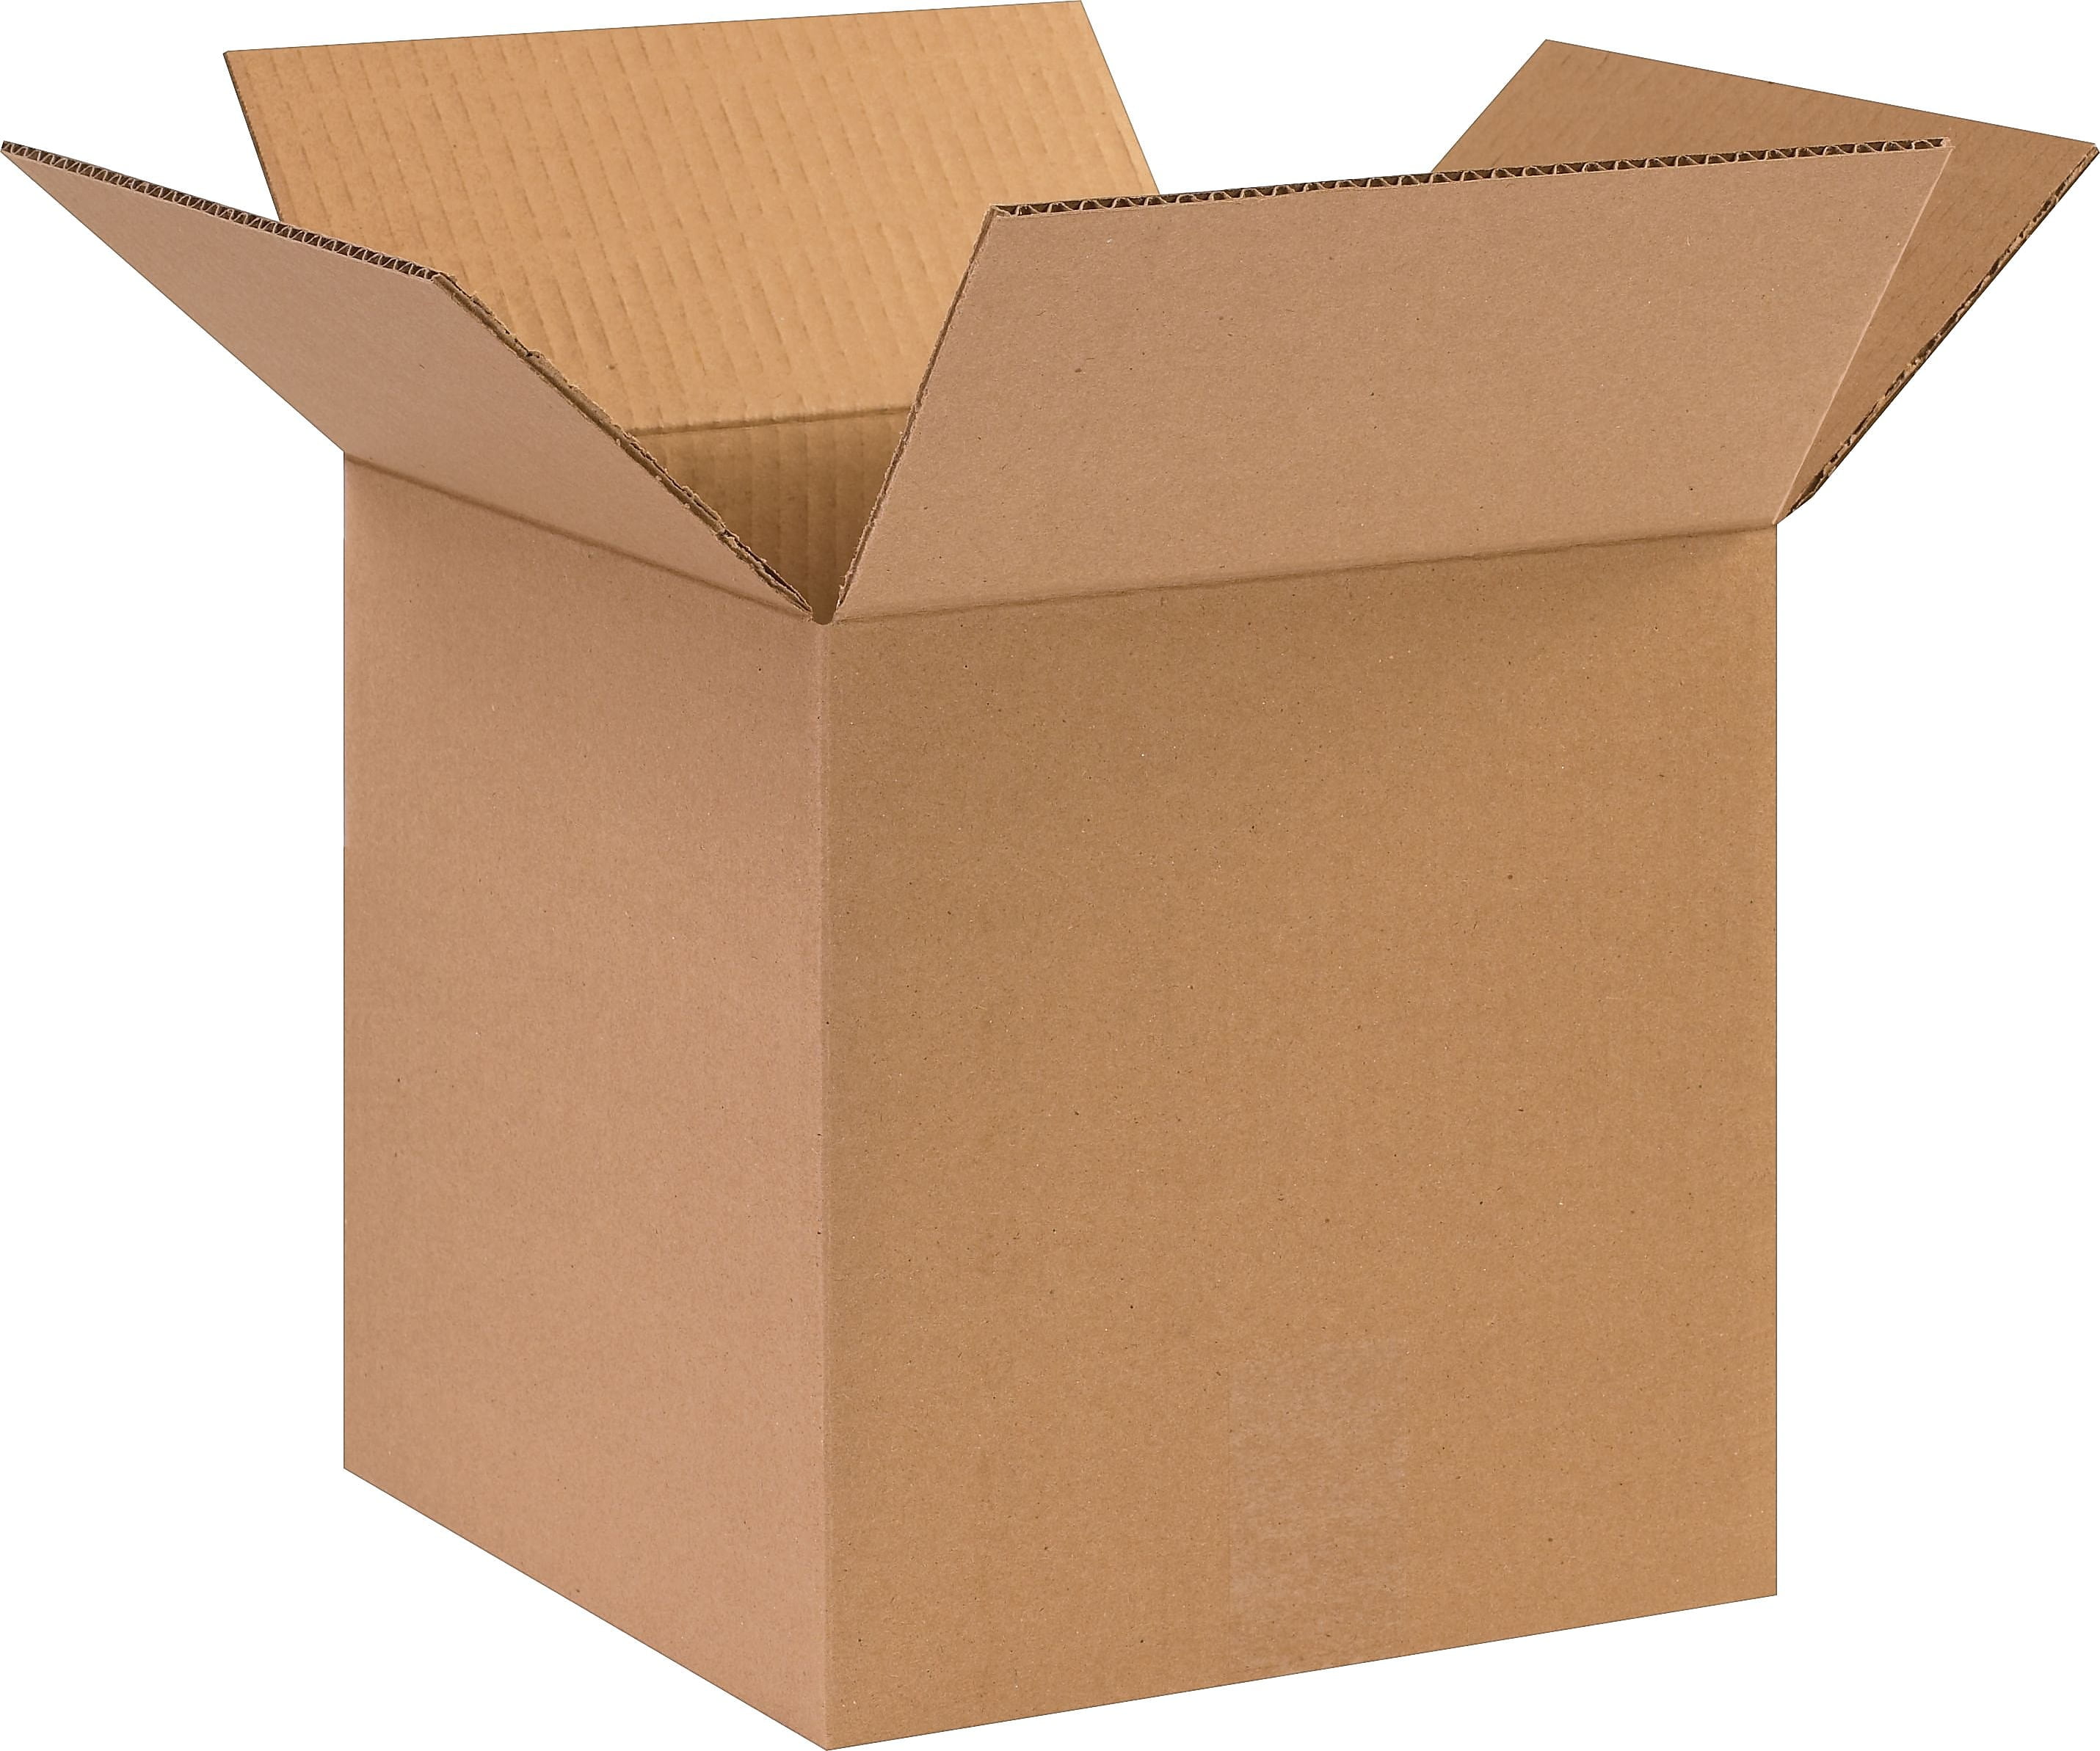 18x12x14 20 Shipping Packing Mailing Moving Boxes Corrugated Carton